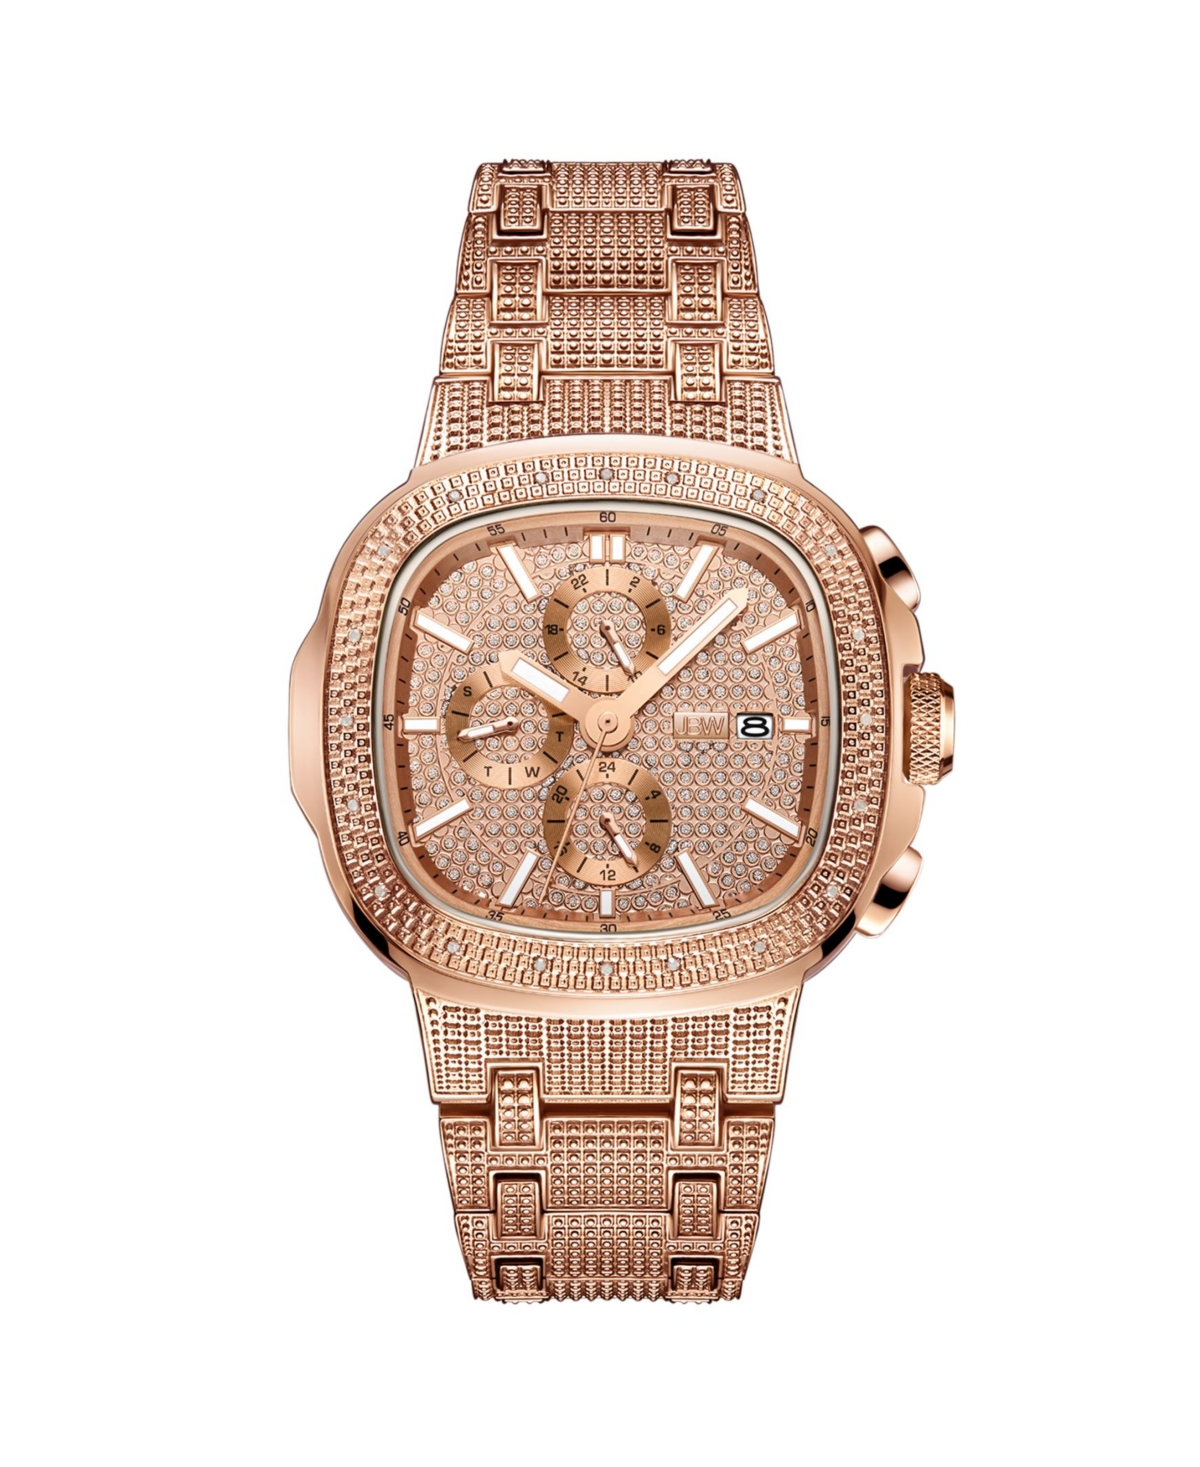 Men's Diamond (1/5 ct. t.w.) Watch in 18k Rose Gold-plated Stainless-steel Watch 48mm - Gold